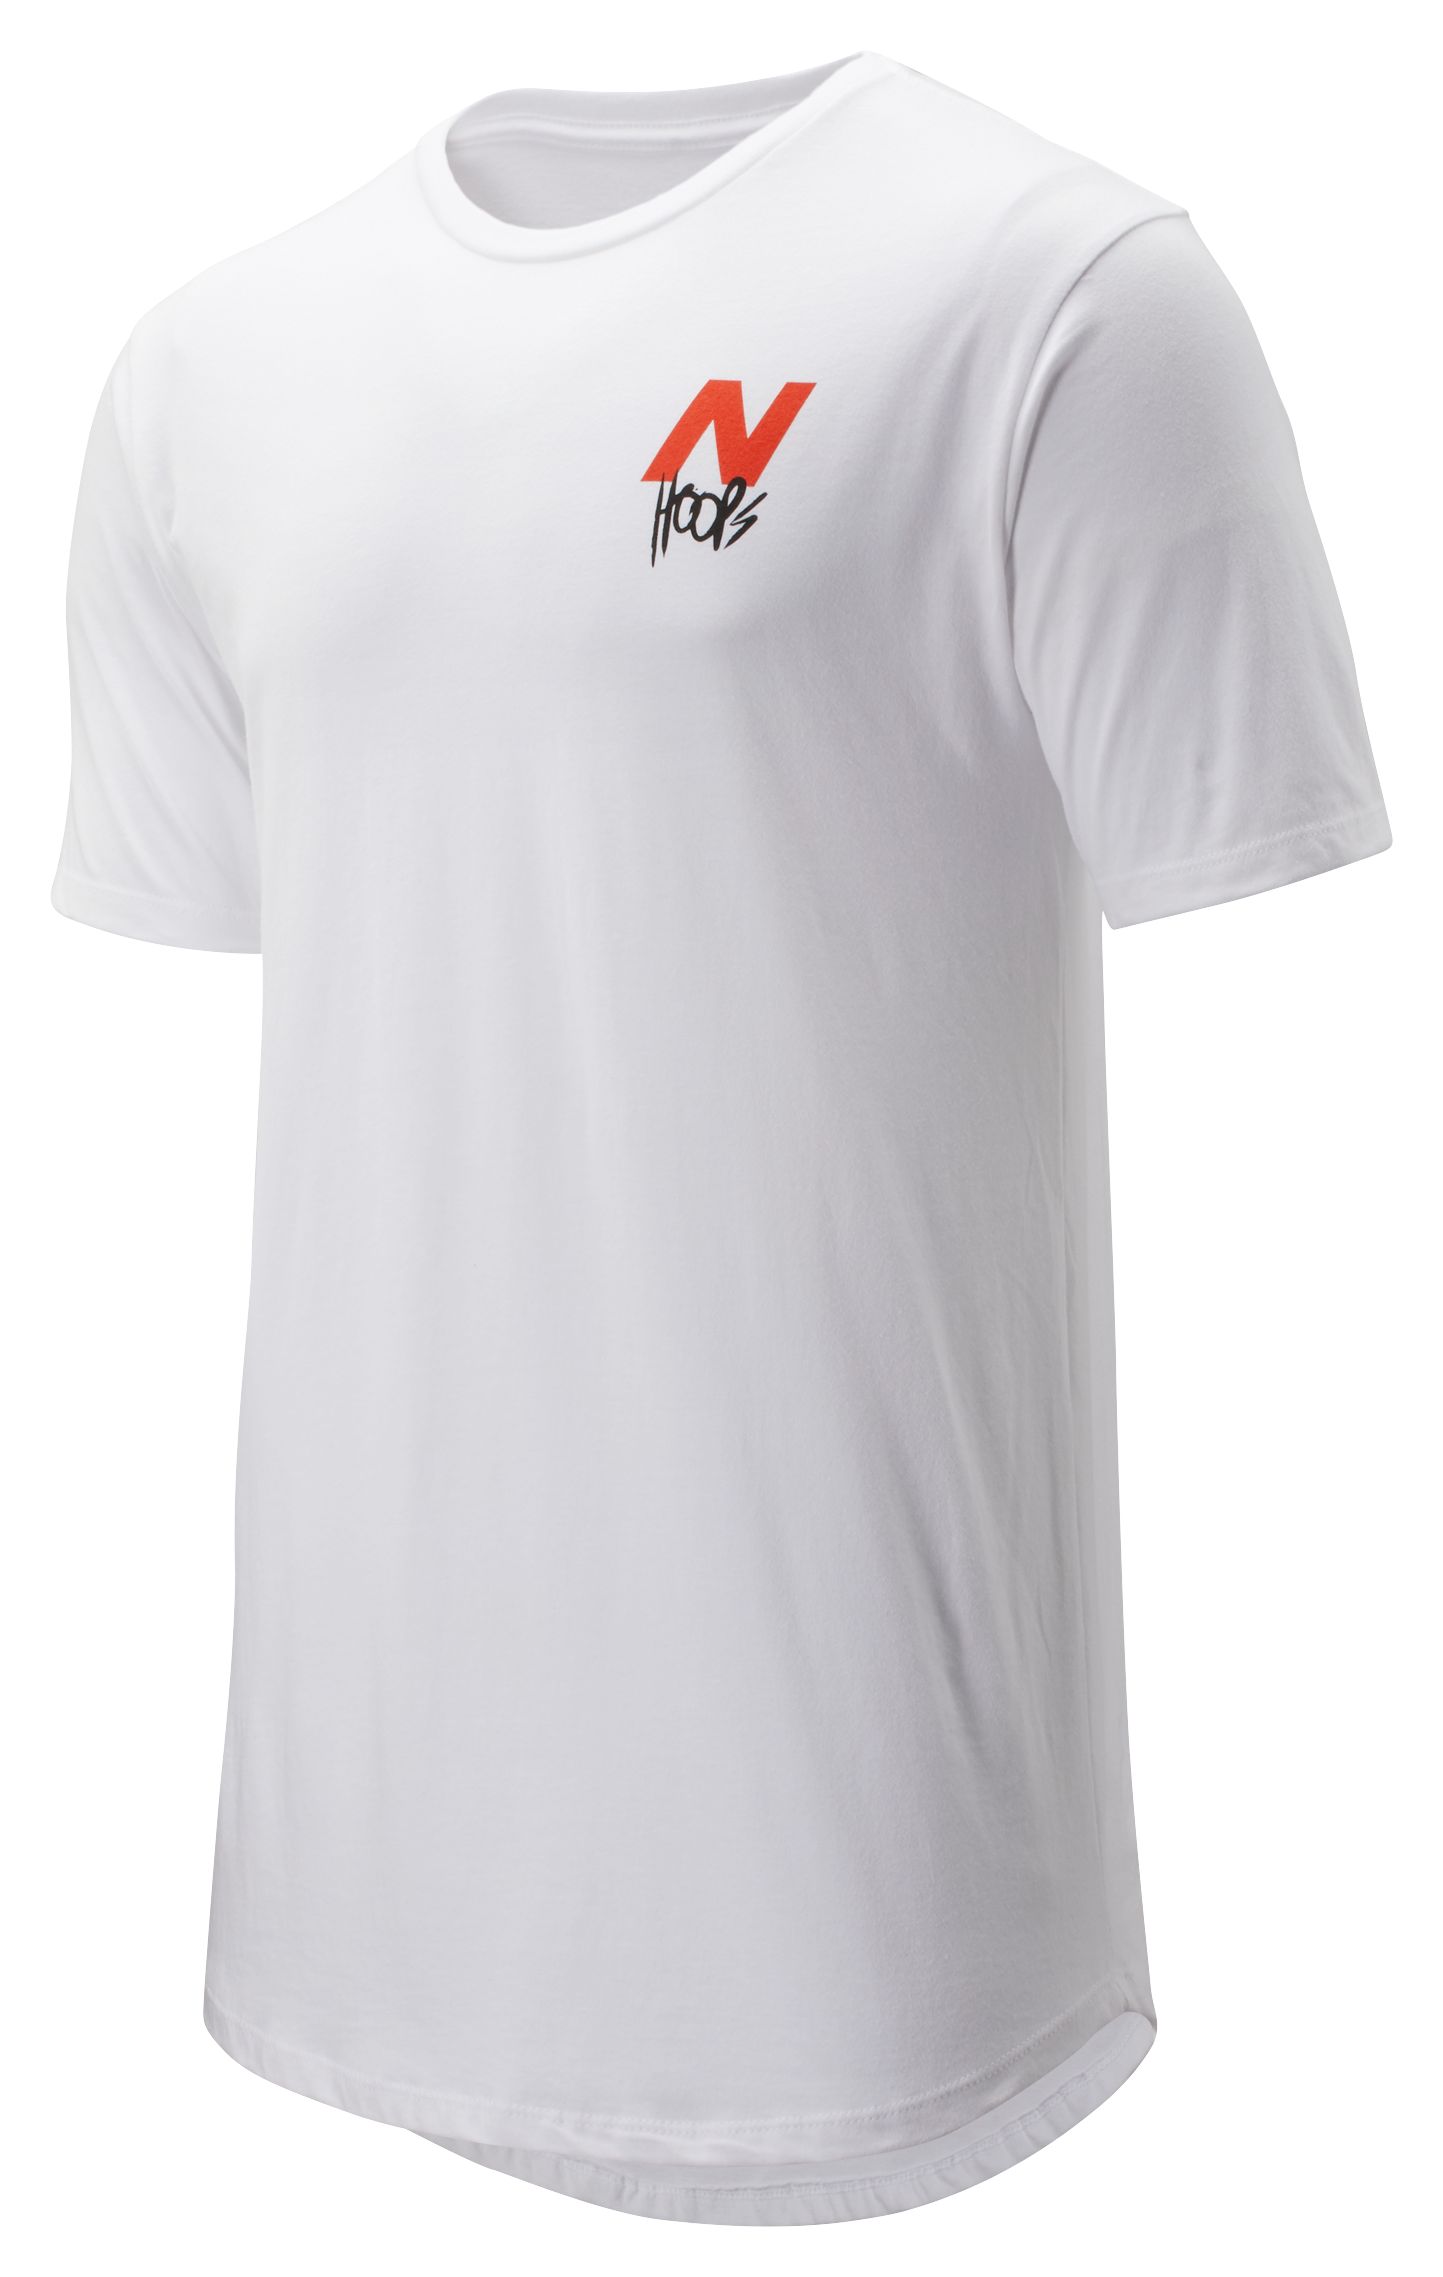 Men's NB Finisher Graphic Tee